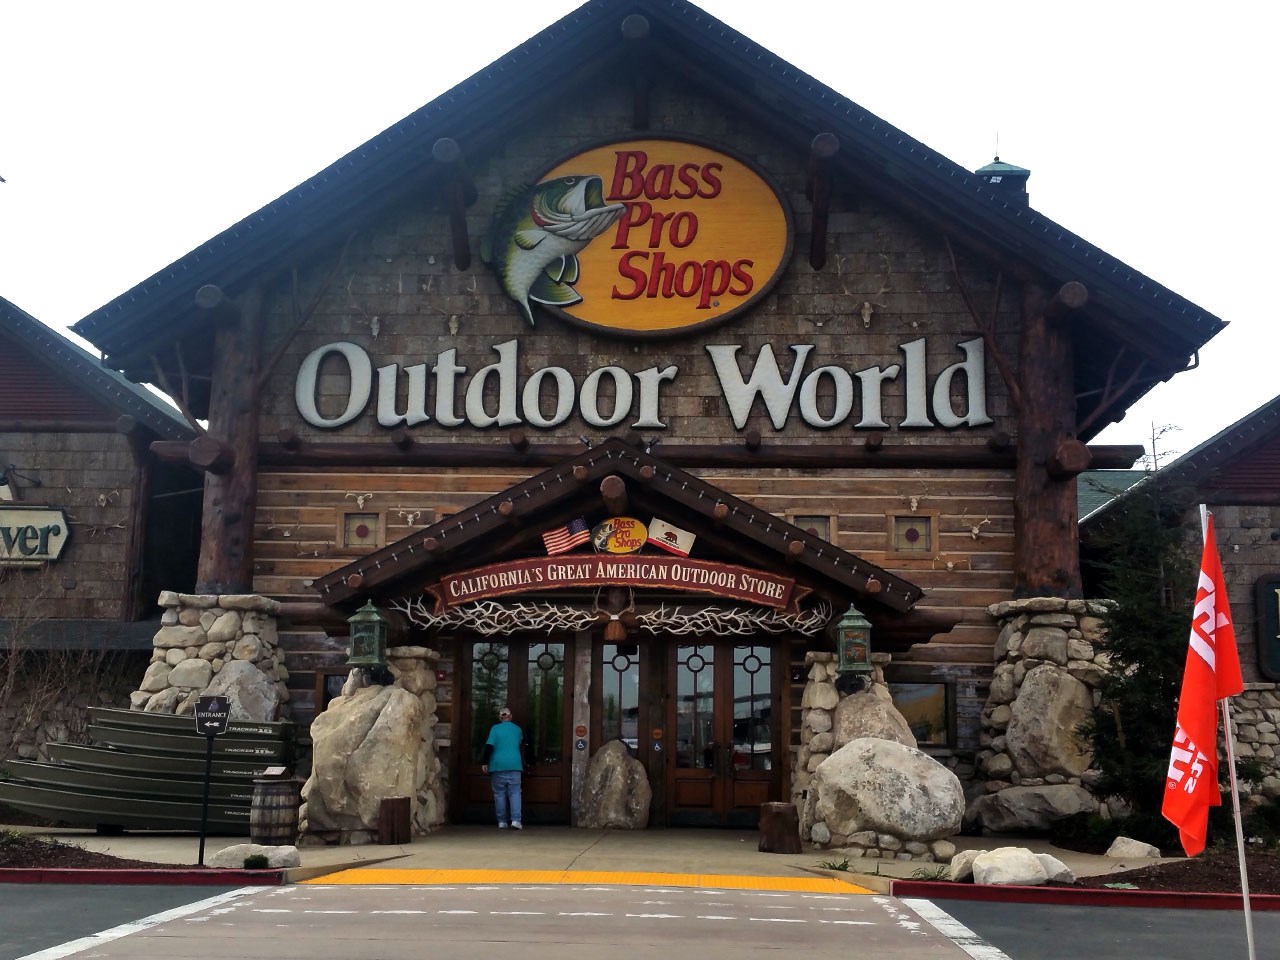 Midland to get a Bass Pro Shop